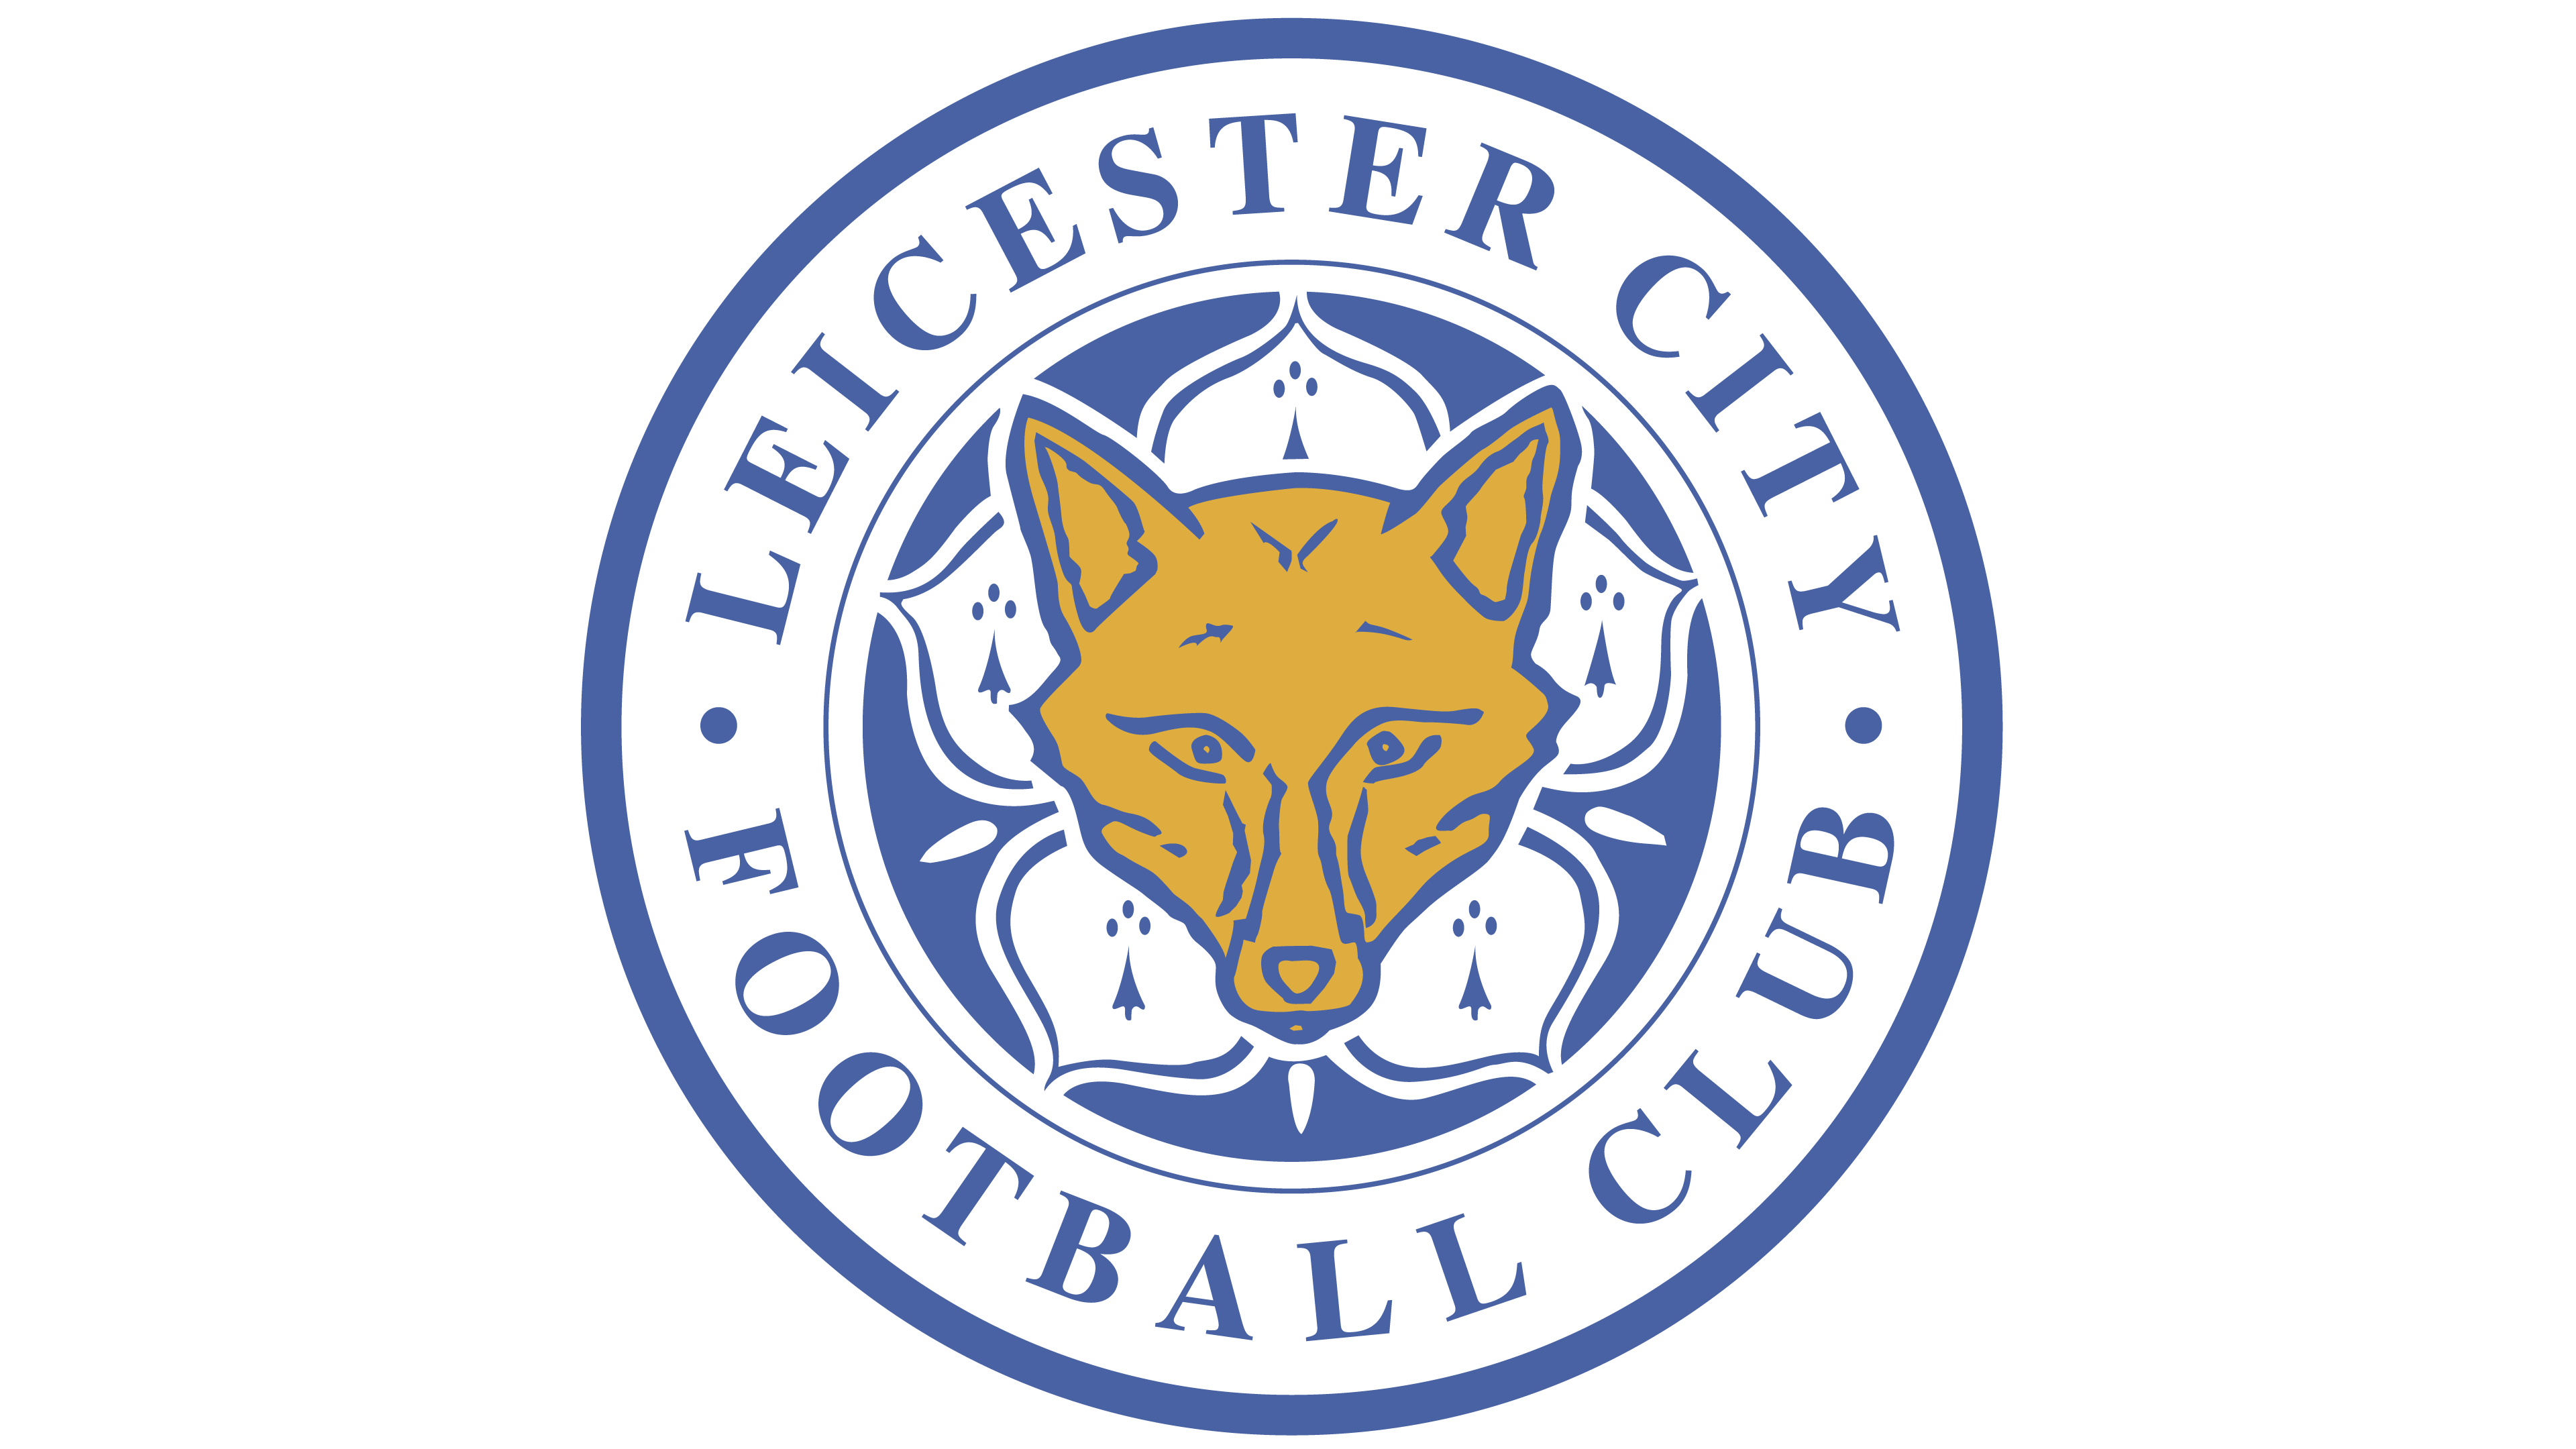 Football Club Logo - Leicester City Logo History of the Team Name and emblem